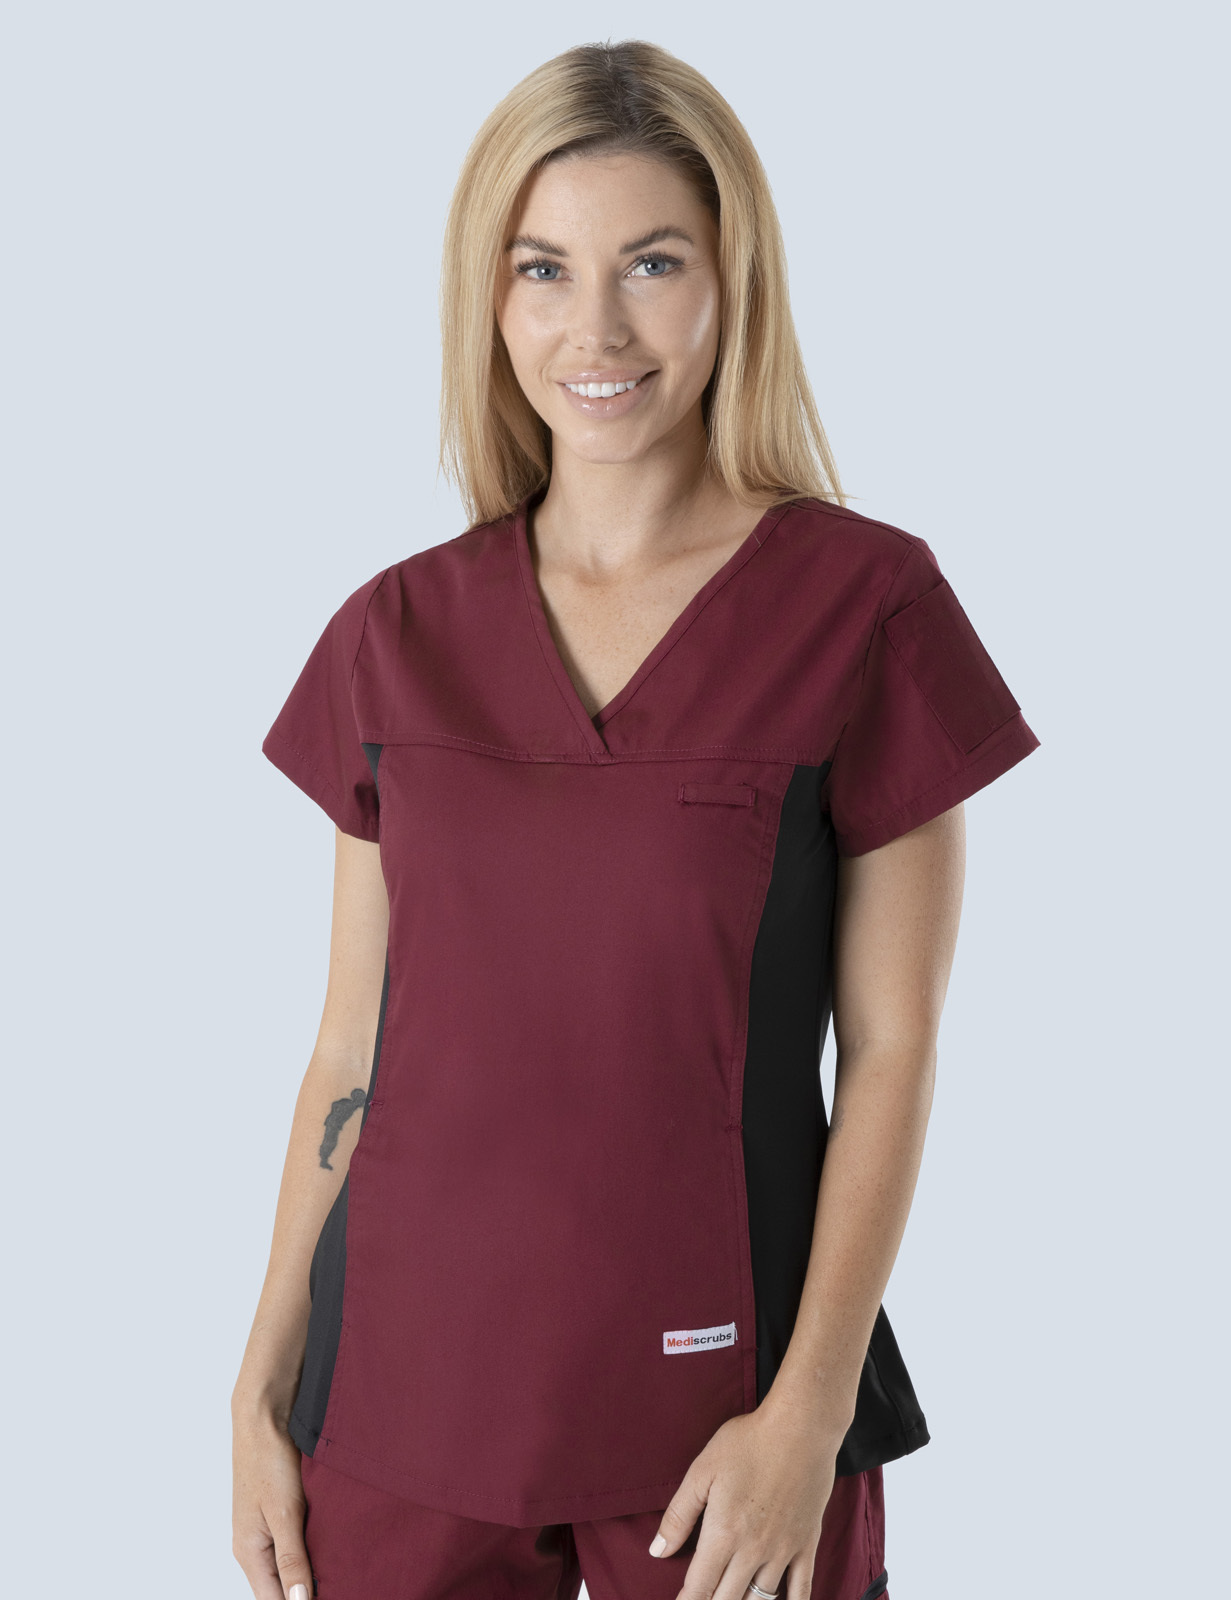 Ashmore Retreat Endorsed Enrolled Nurse Top Only Bundle (Women's Fit Spandex in Burgundy incl Logo) 